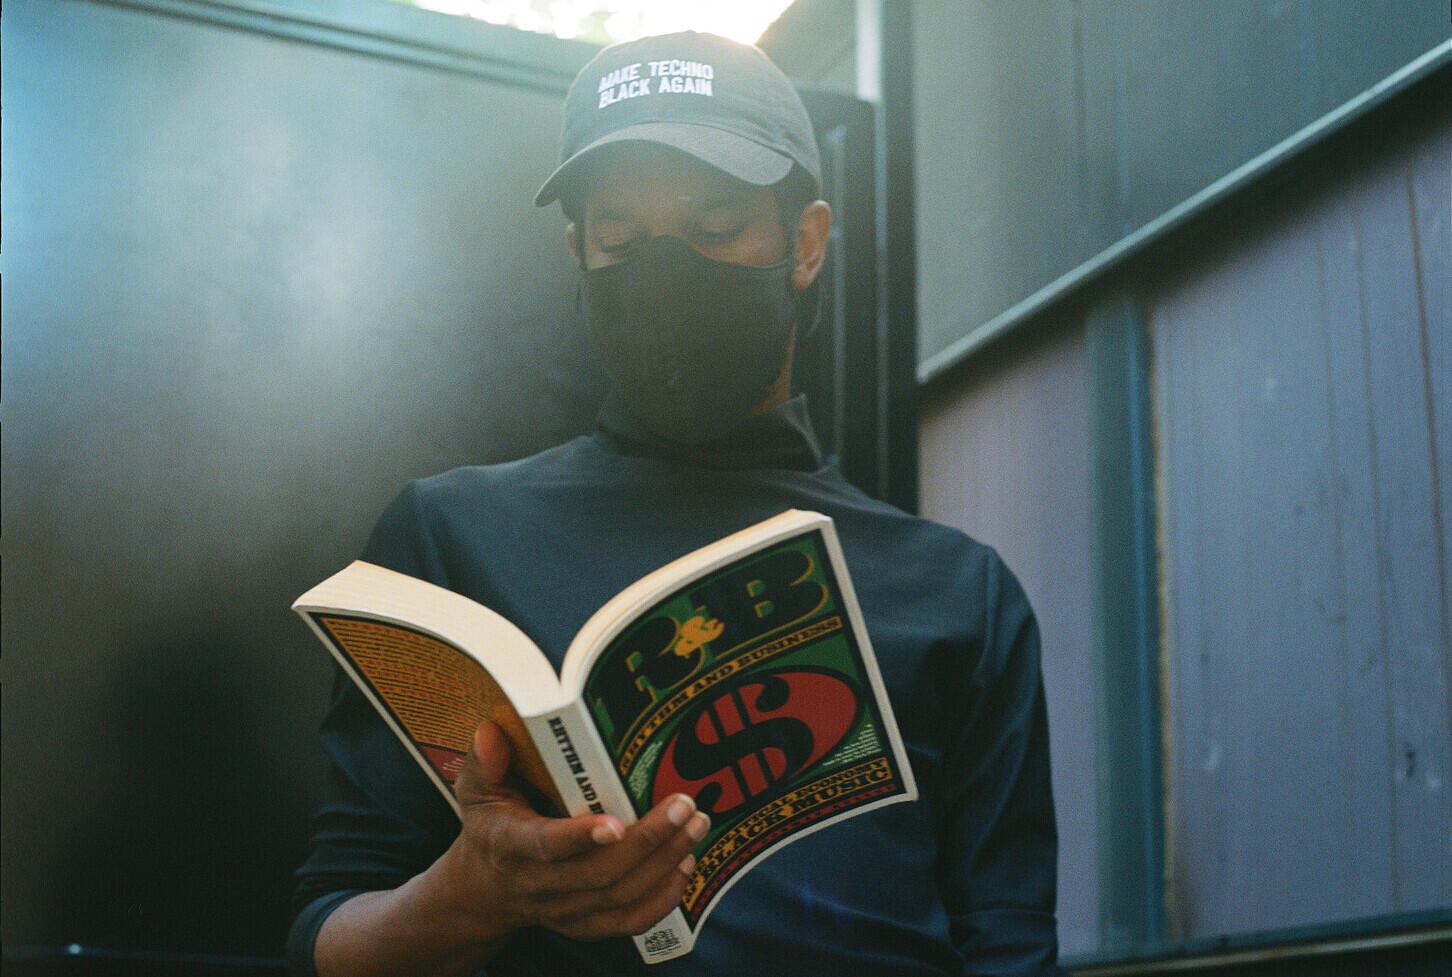 DeForrest Brown Jr reading a book while wearing a baseball cap and black face covering